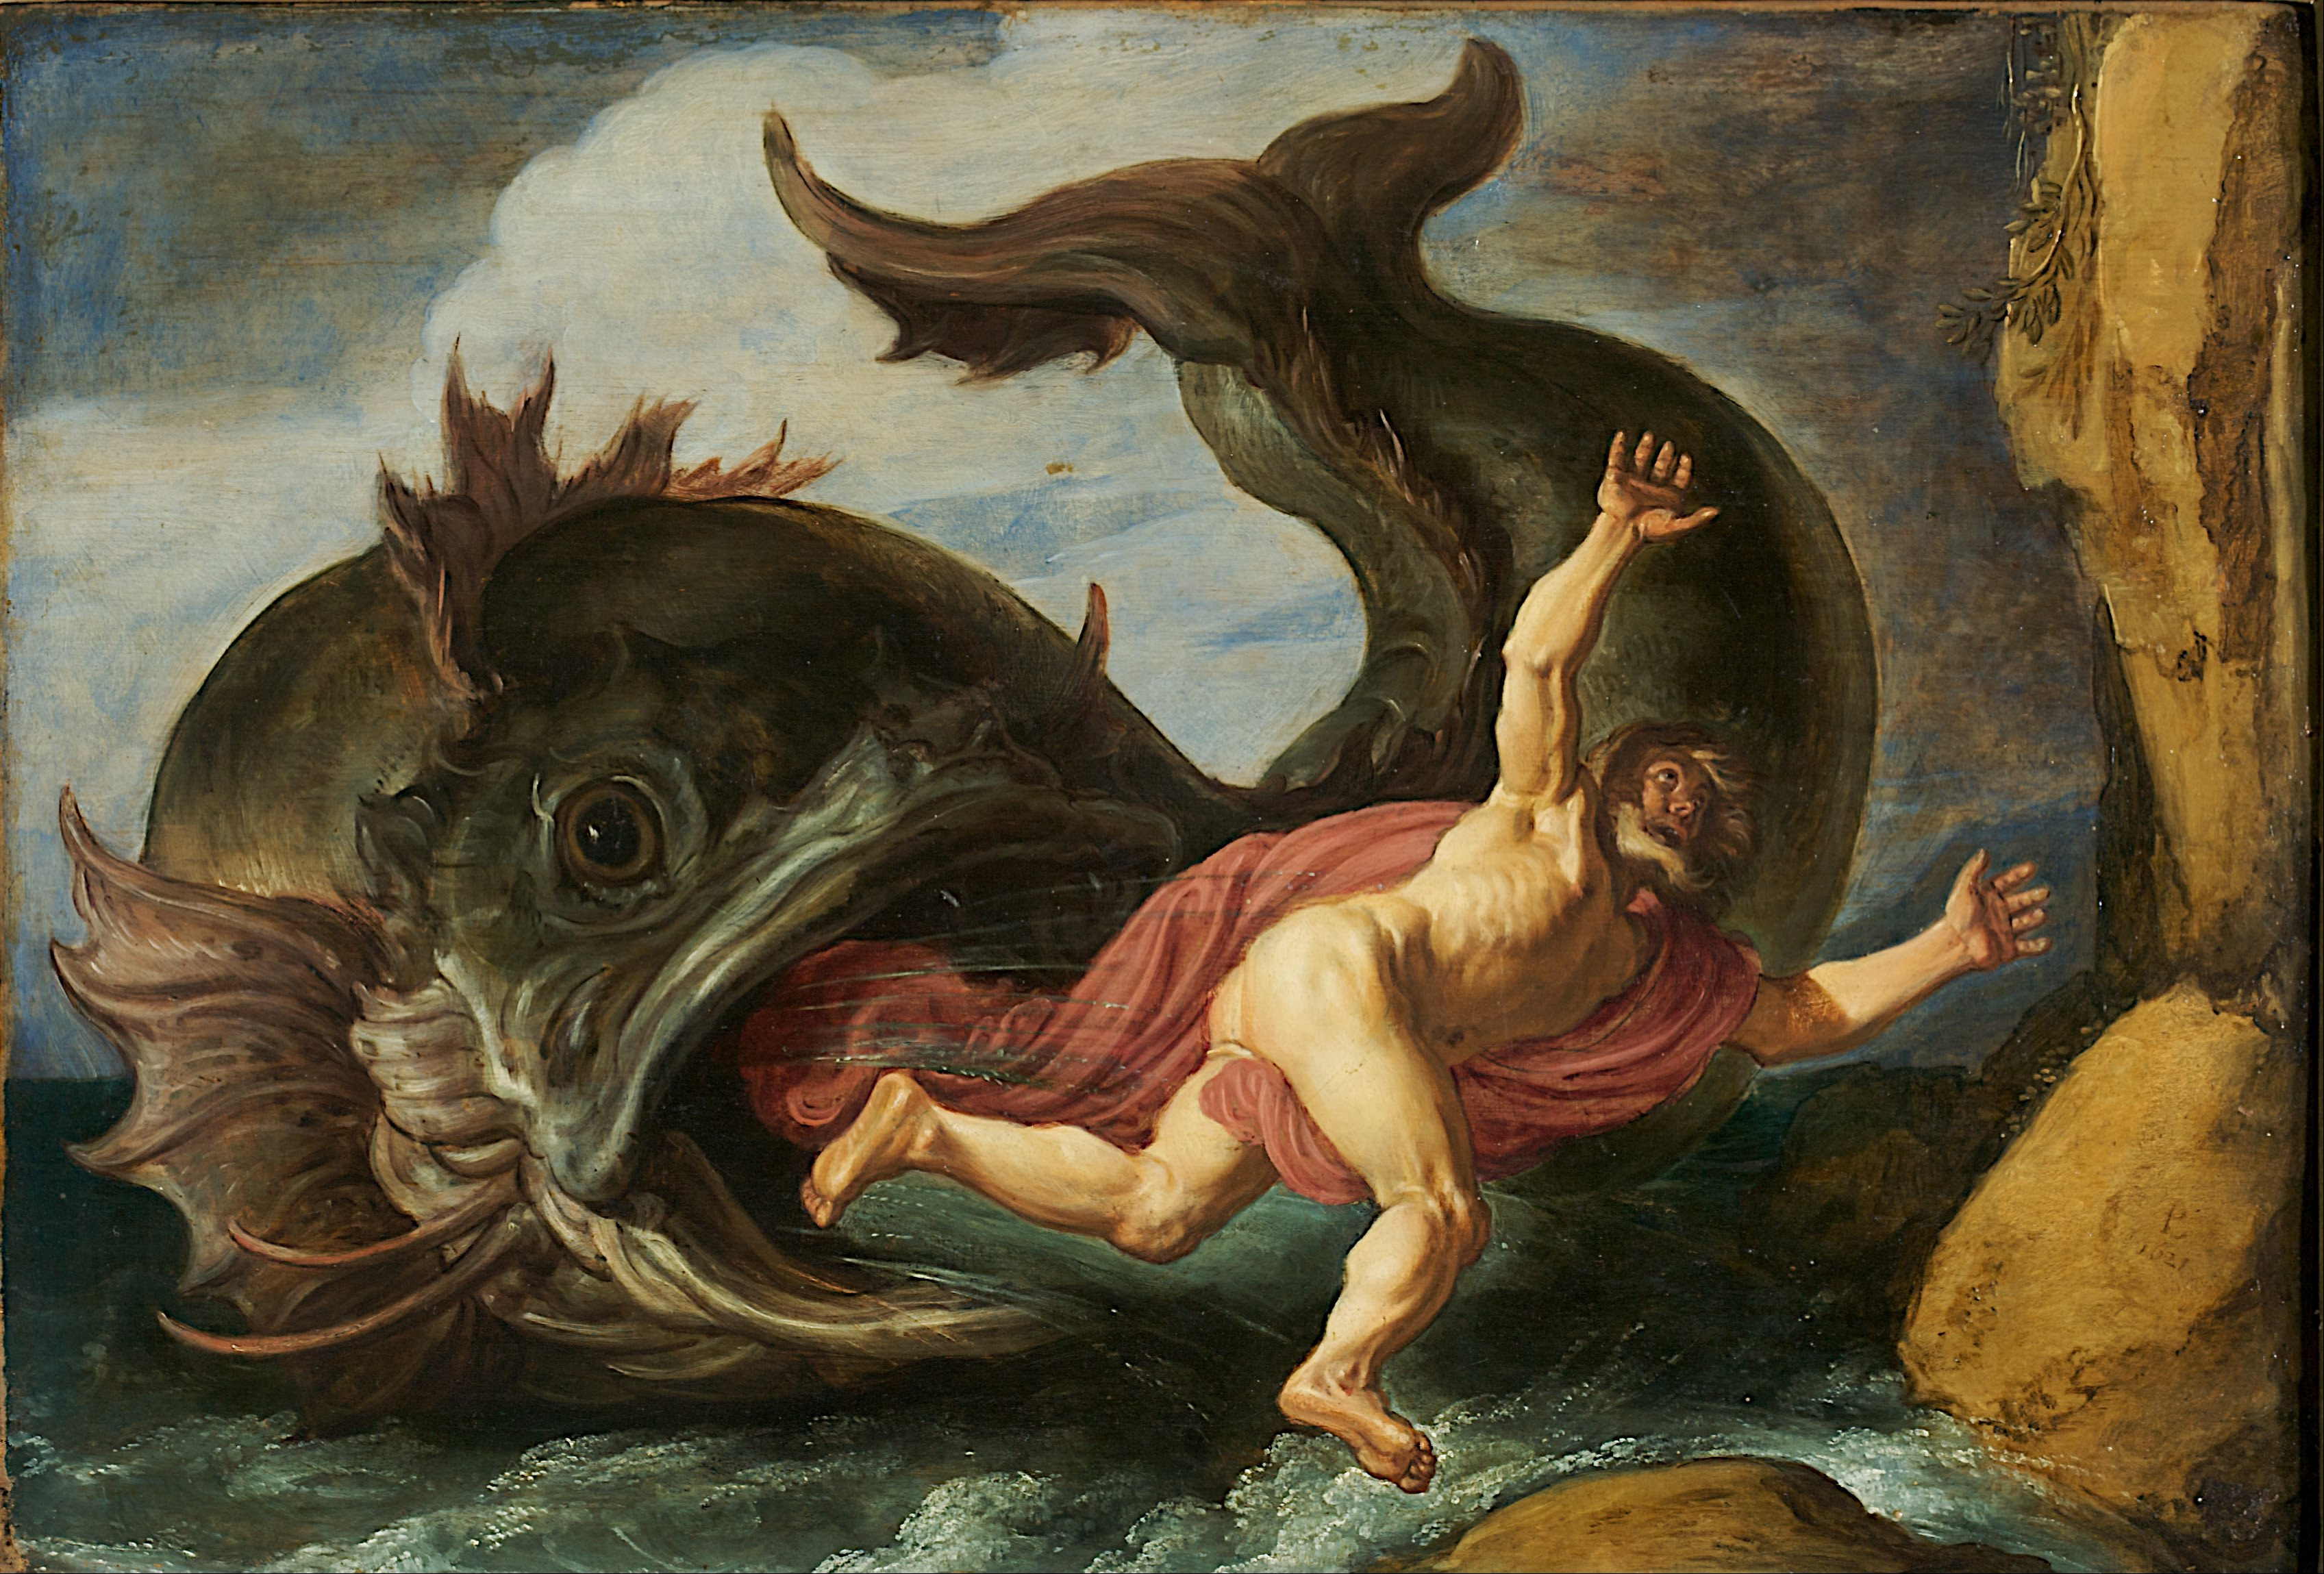 Pieter Lastman - Jonah and the Whale - Google Art Project